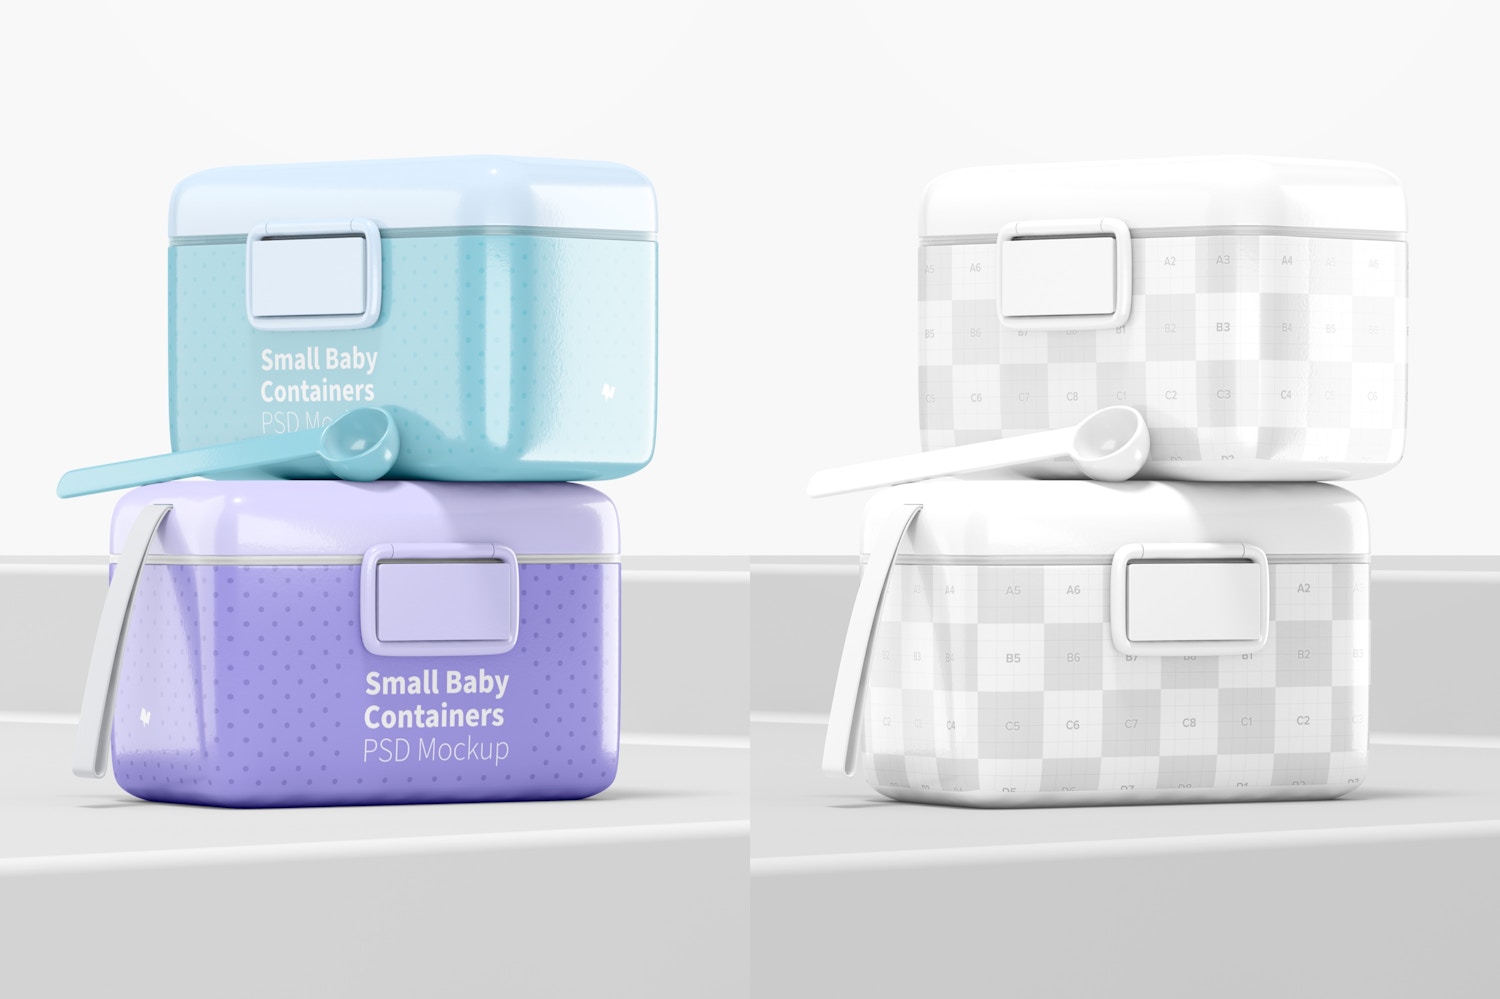 Small Baby Milk Powder Container Mockup, Perspective